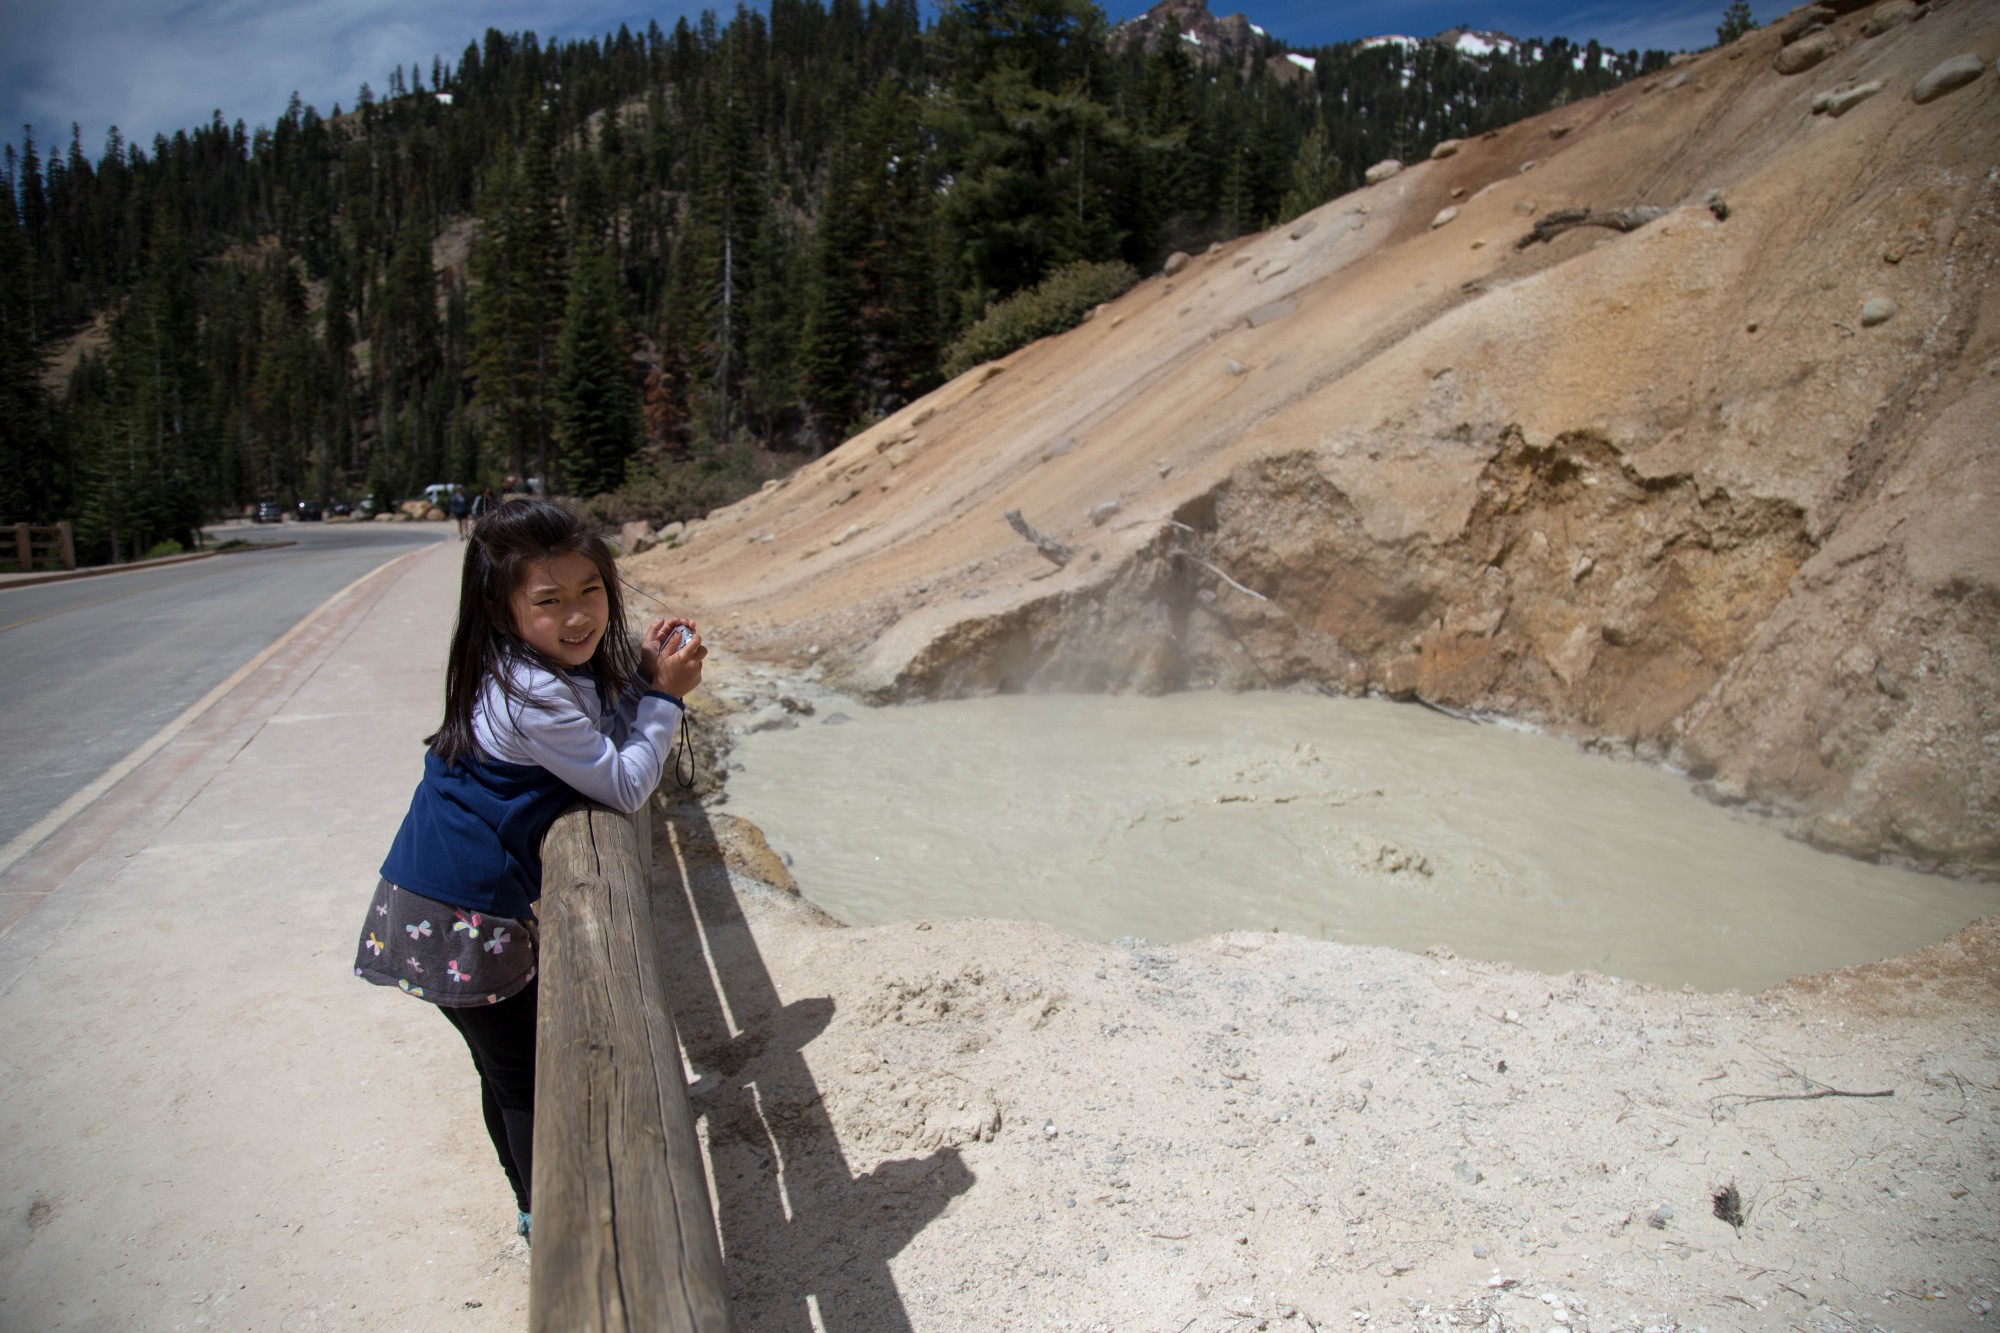 Our first stop was Lassen Volcanic National Park. It's the worst park ever. There is no playground and it stinks. Here is Kayli with some cool bubbling water, but not happy because it is stinky water.